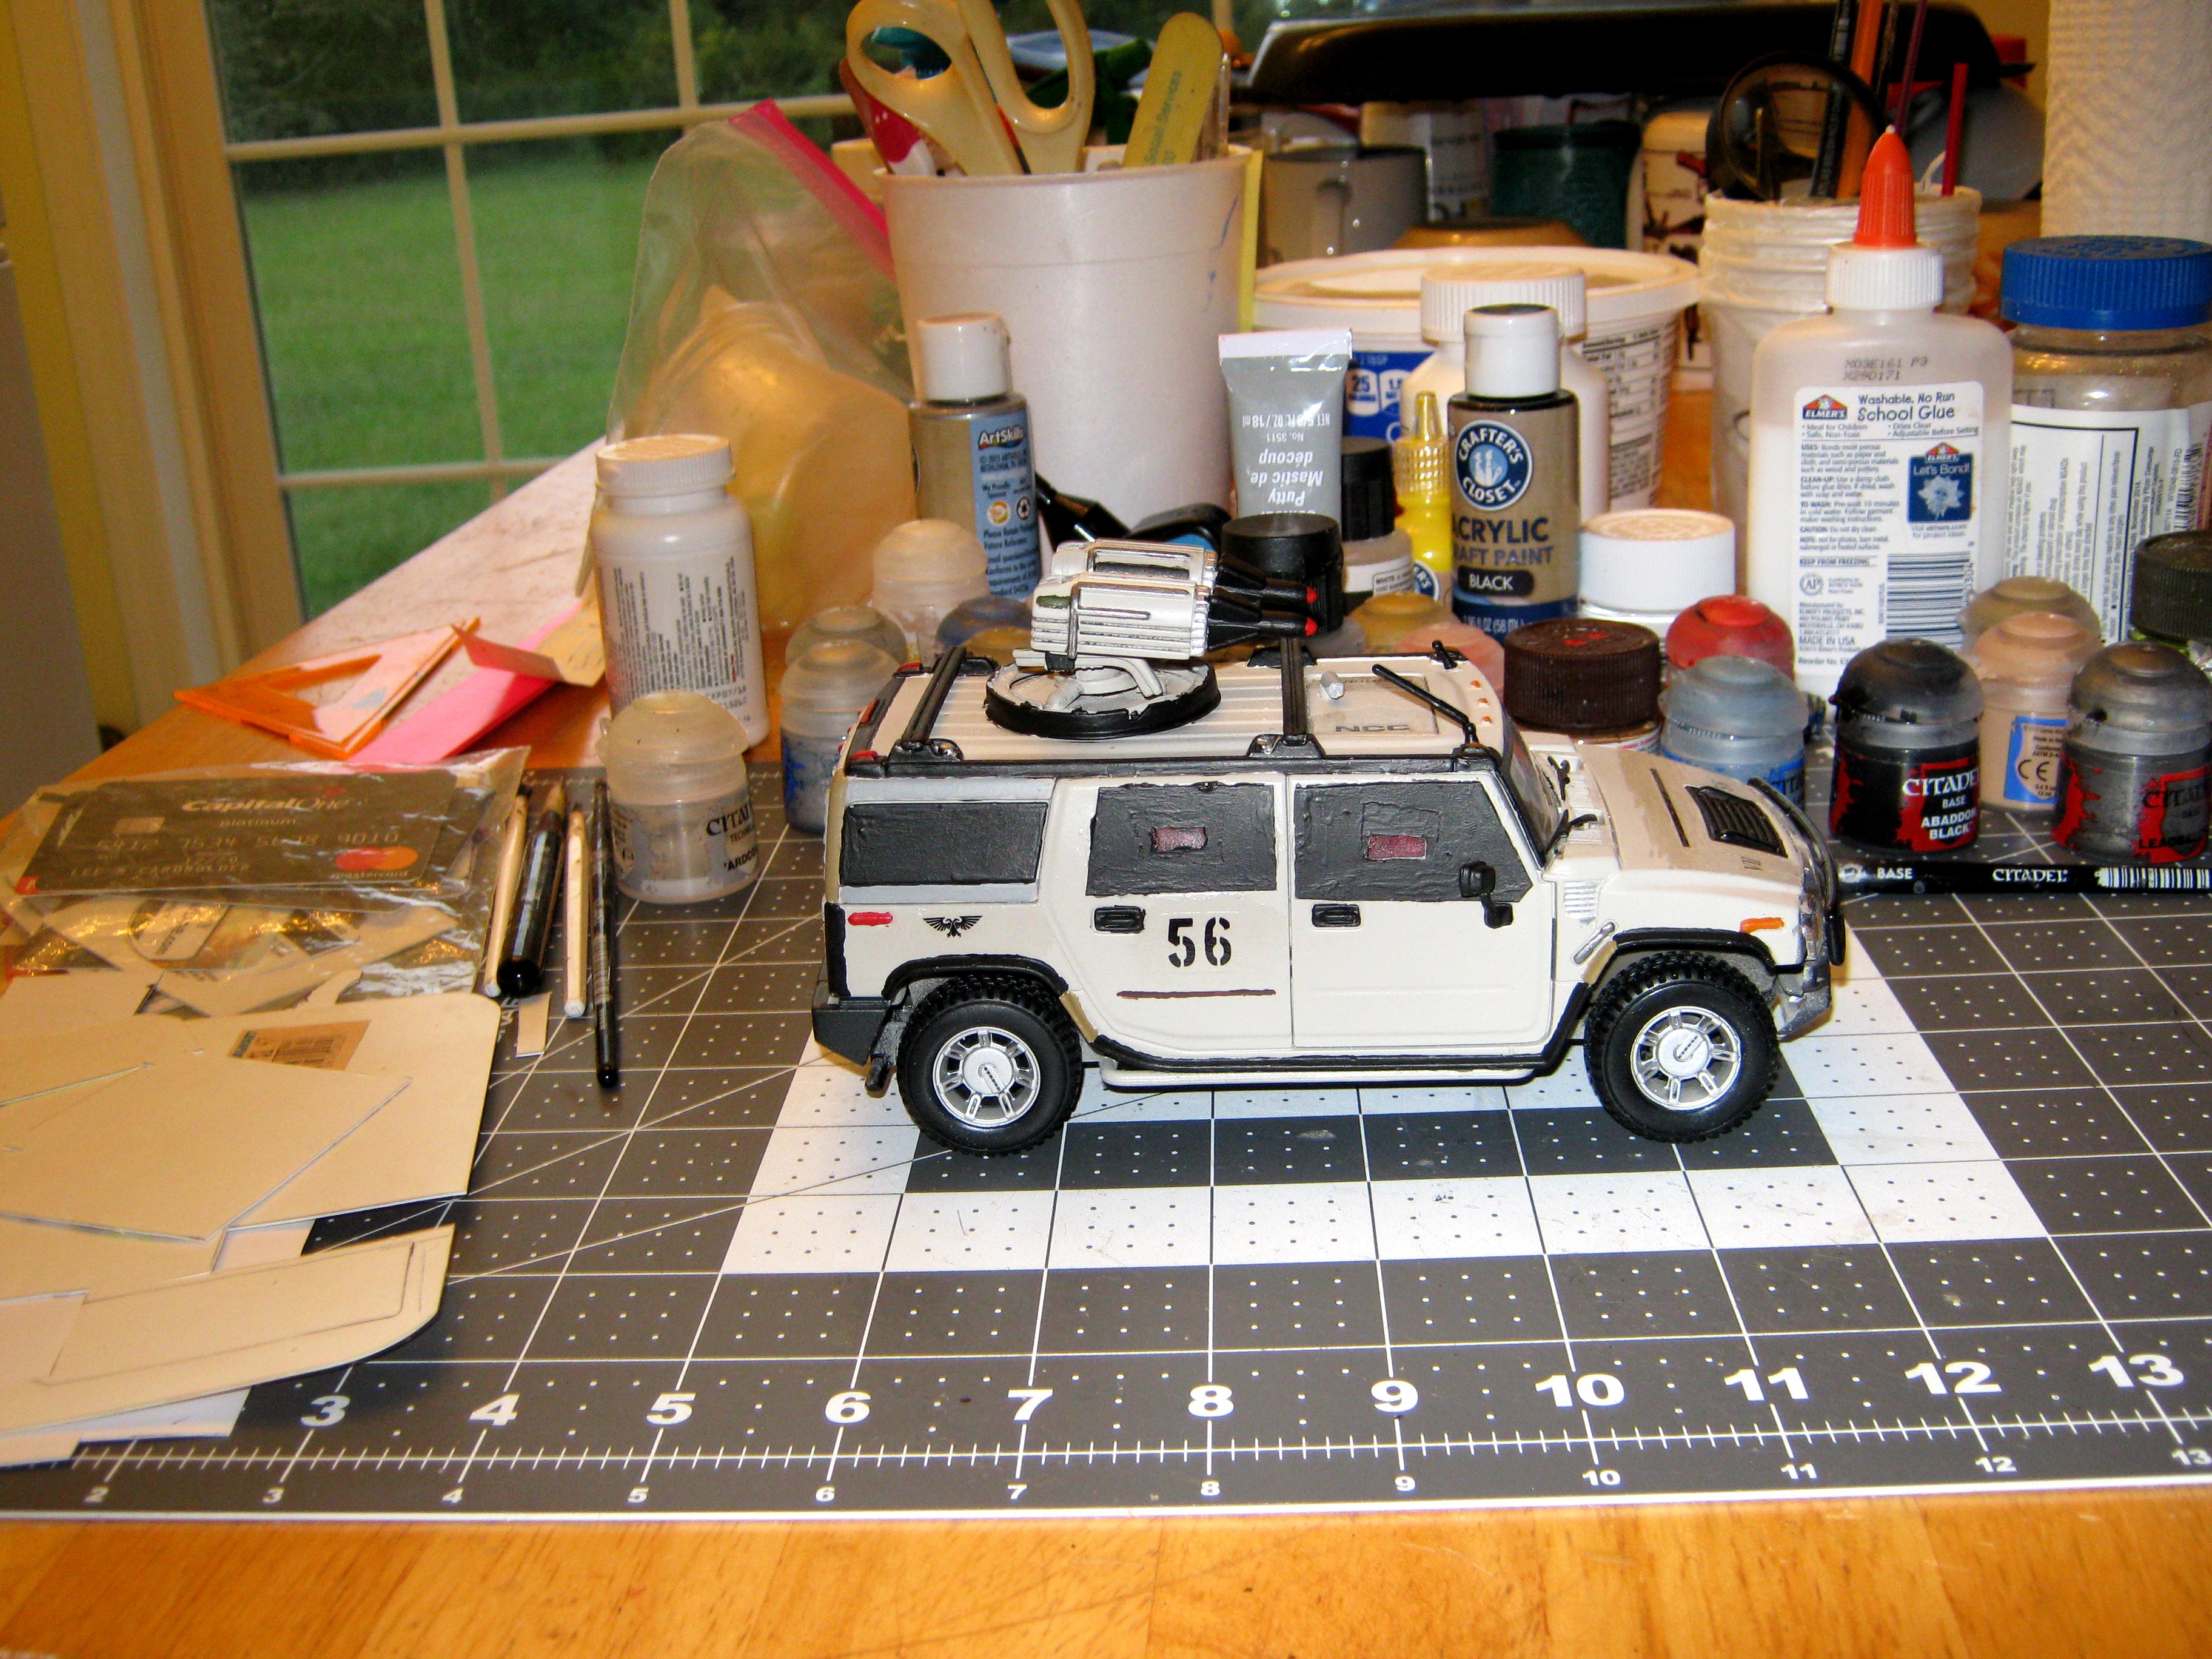 Afv, Conversion, Counts As, Die Cast, H2, High Mobility Vehicle, Hummer, Humvee, Imperial, Transport, Wheeled Vehicle